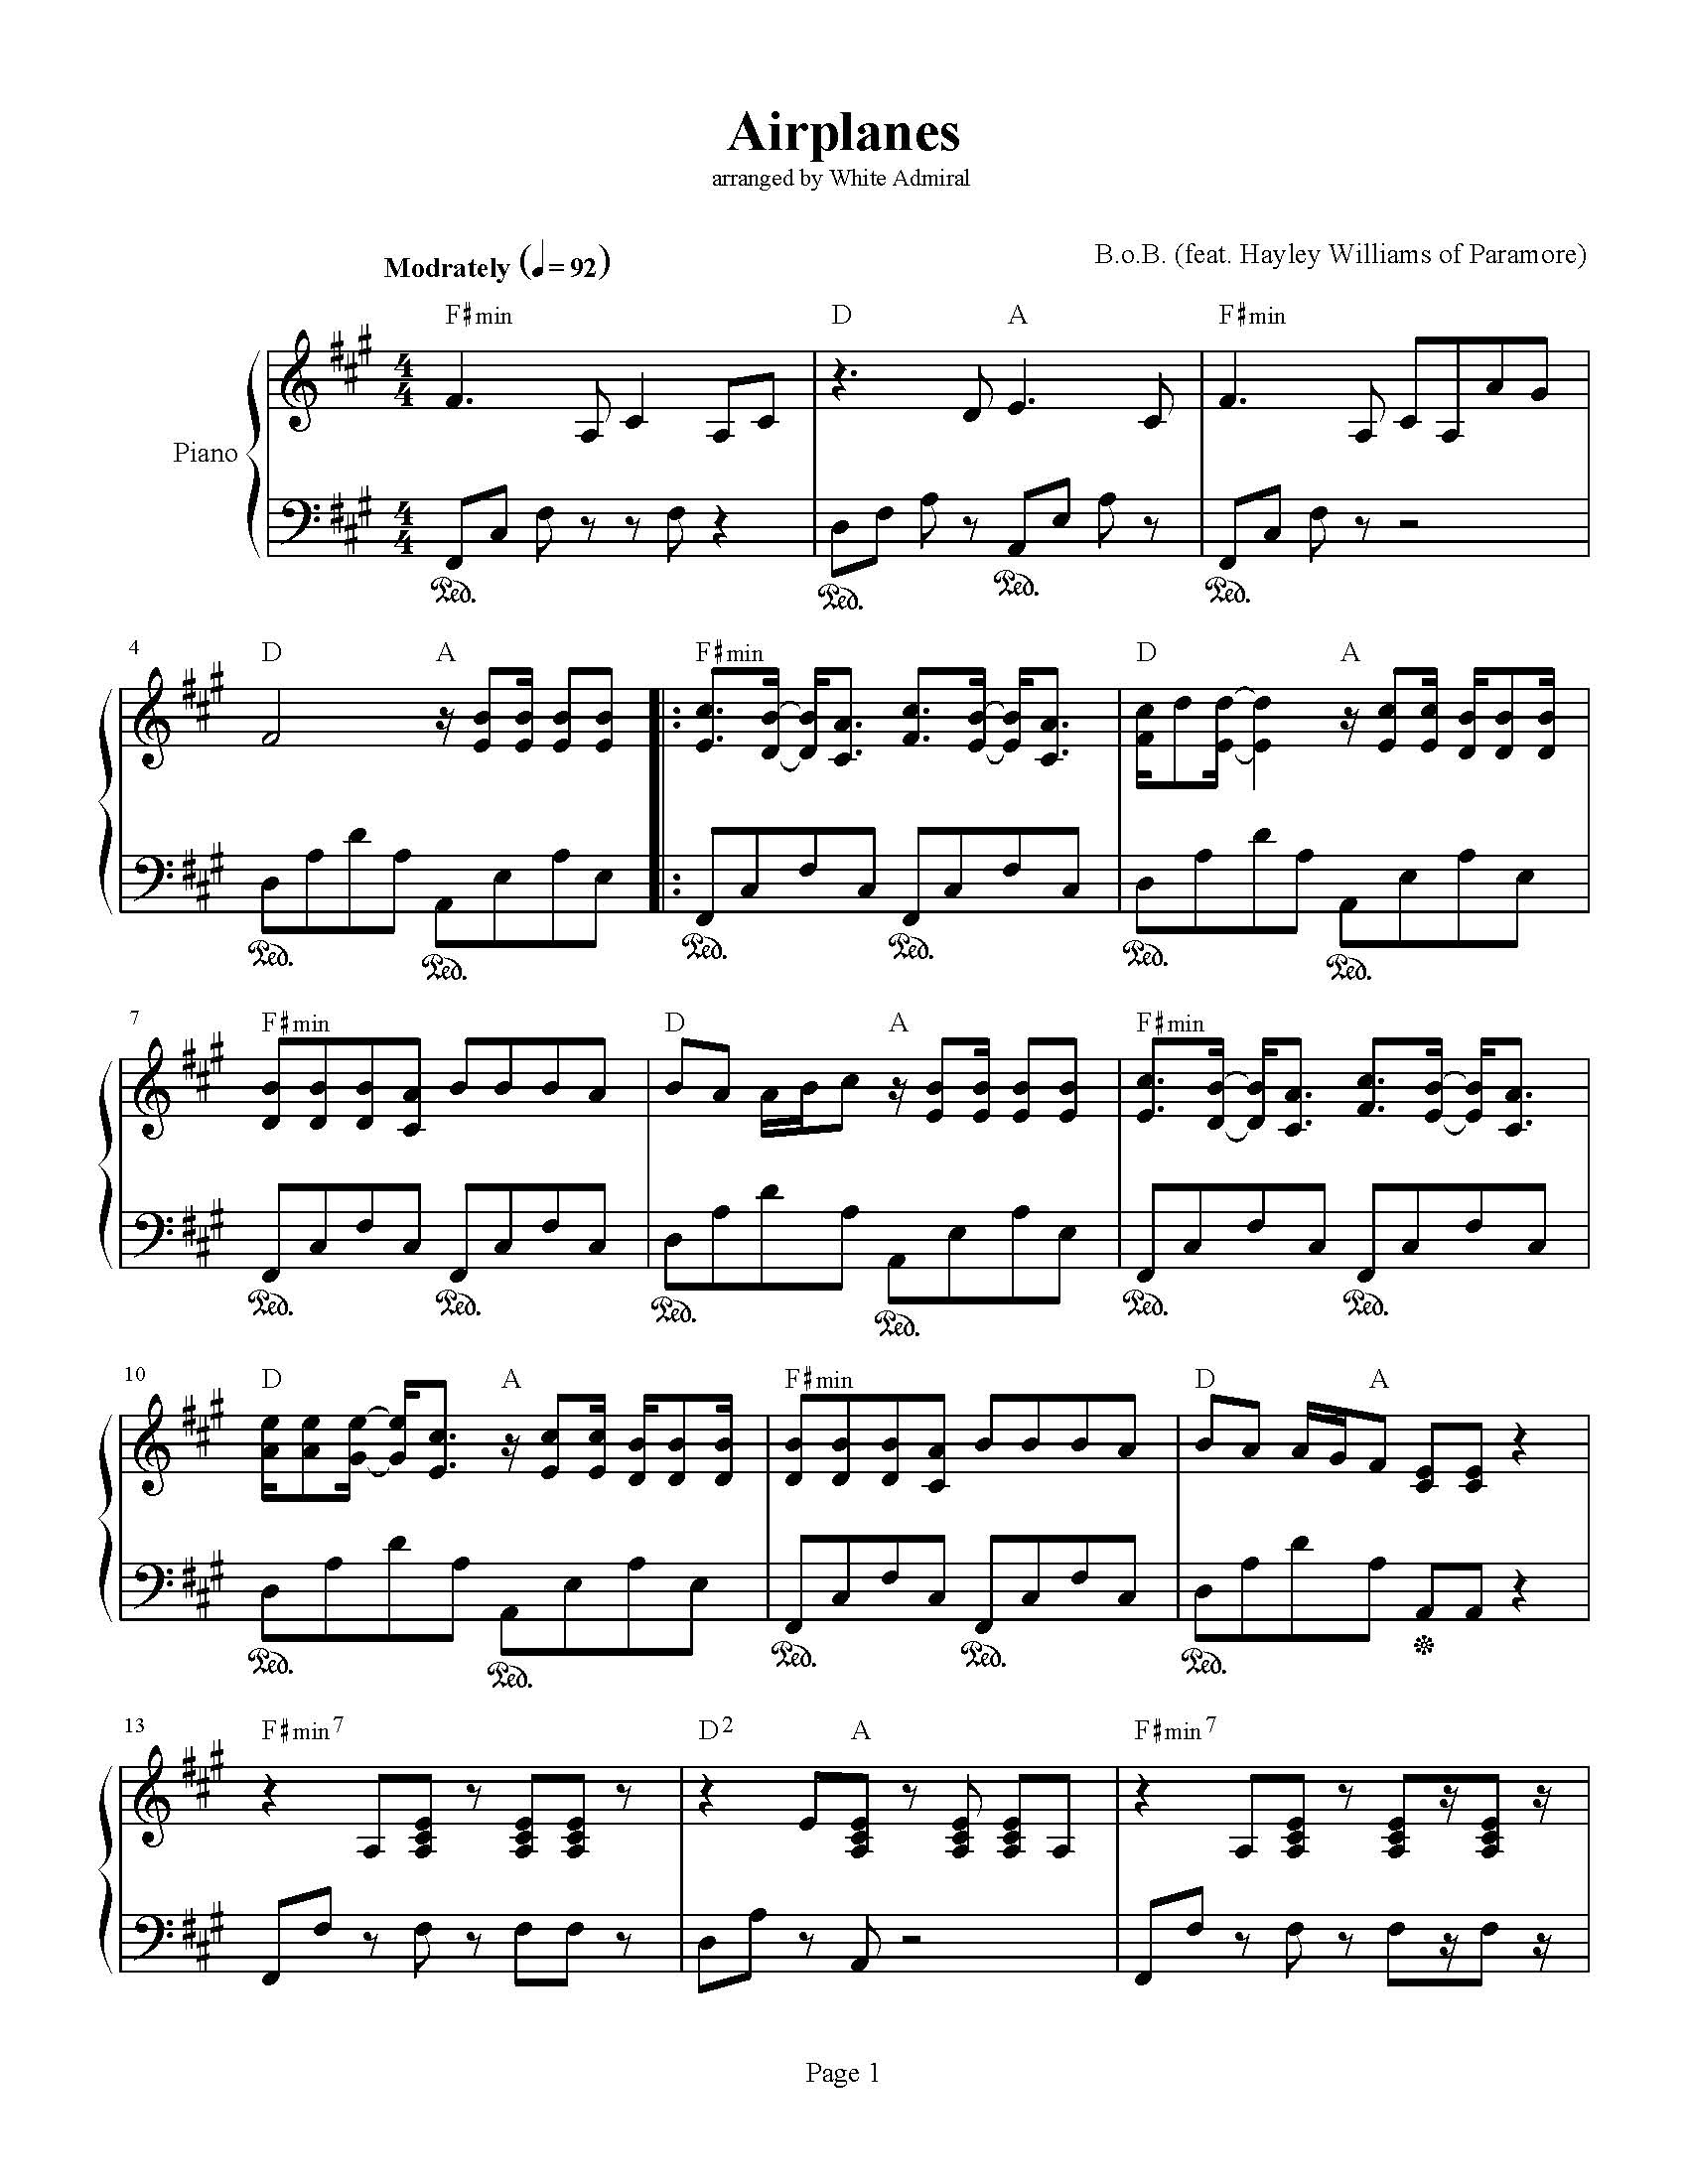 Airplanes - B.o.b. (Feat. Hayley Williams Of Paramore) | True with regard to Airplanes Piano Sheet Music Free Printable